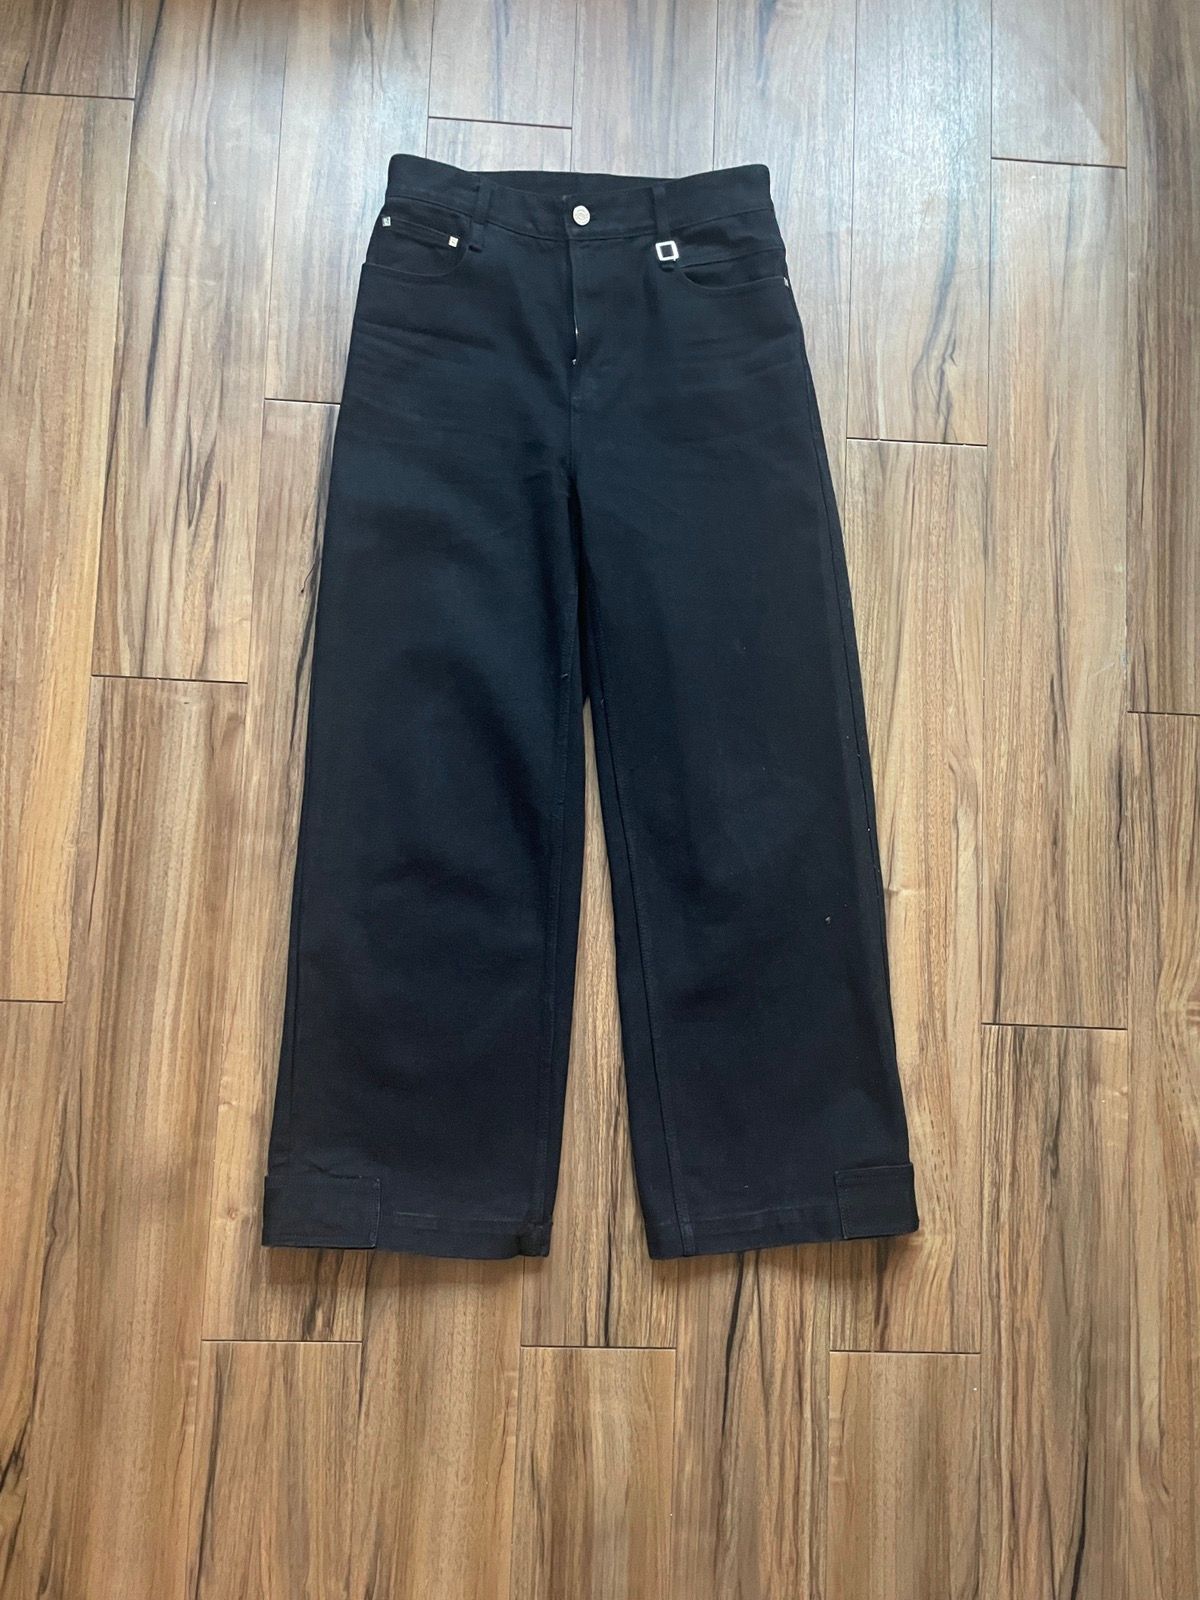 Pre-owned Wooyoungmi Wide Leg Black Jeans